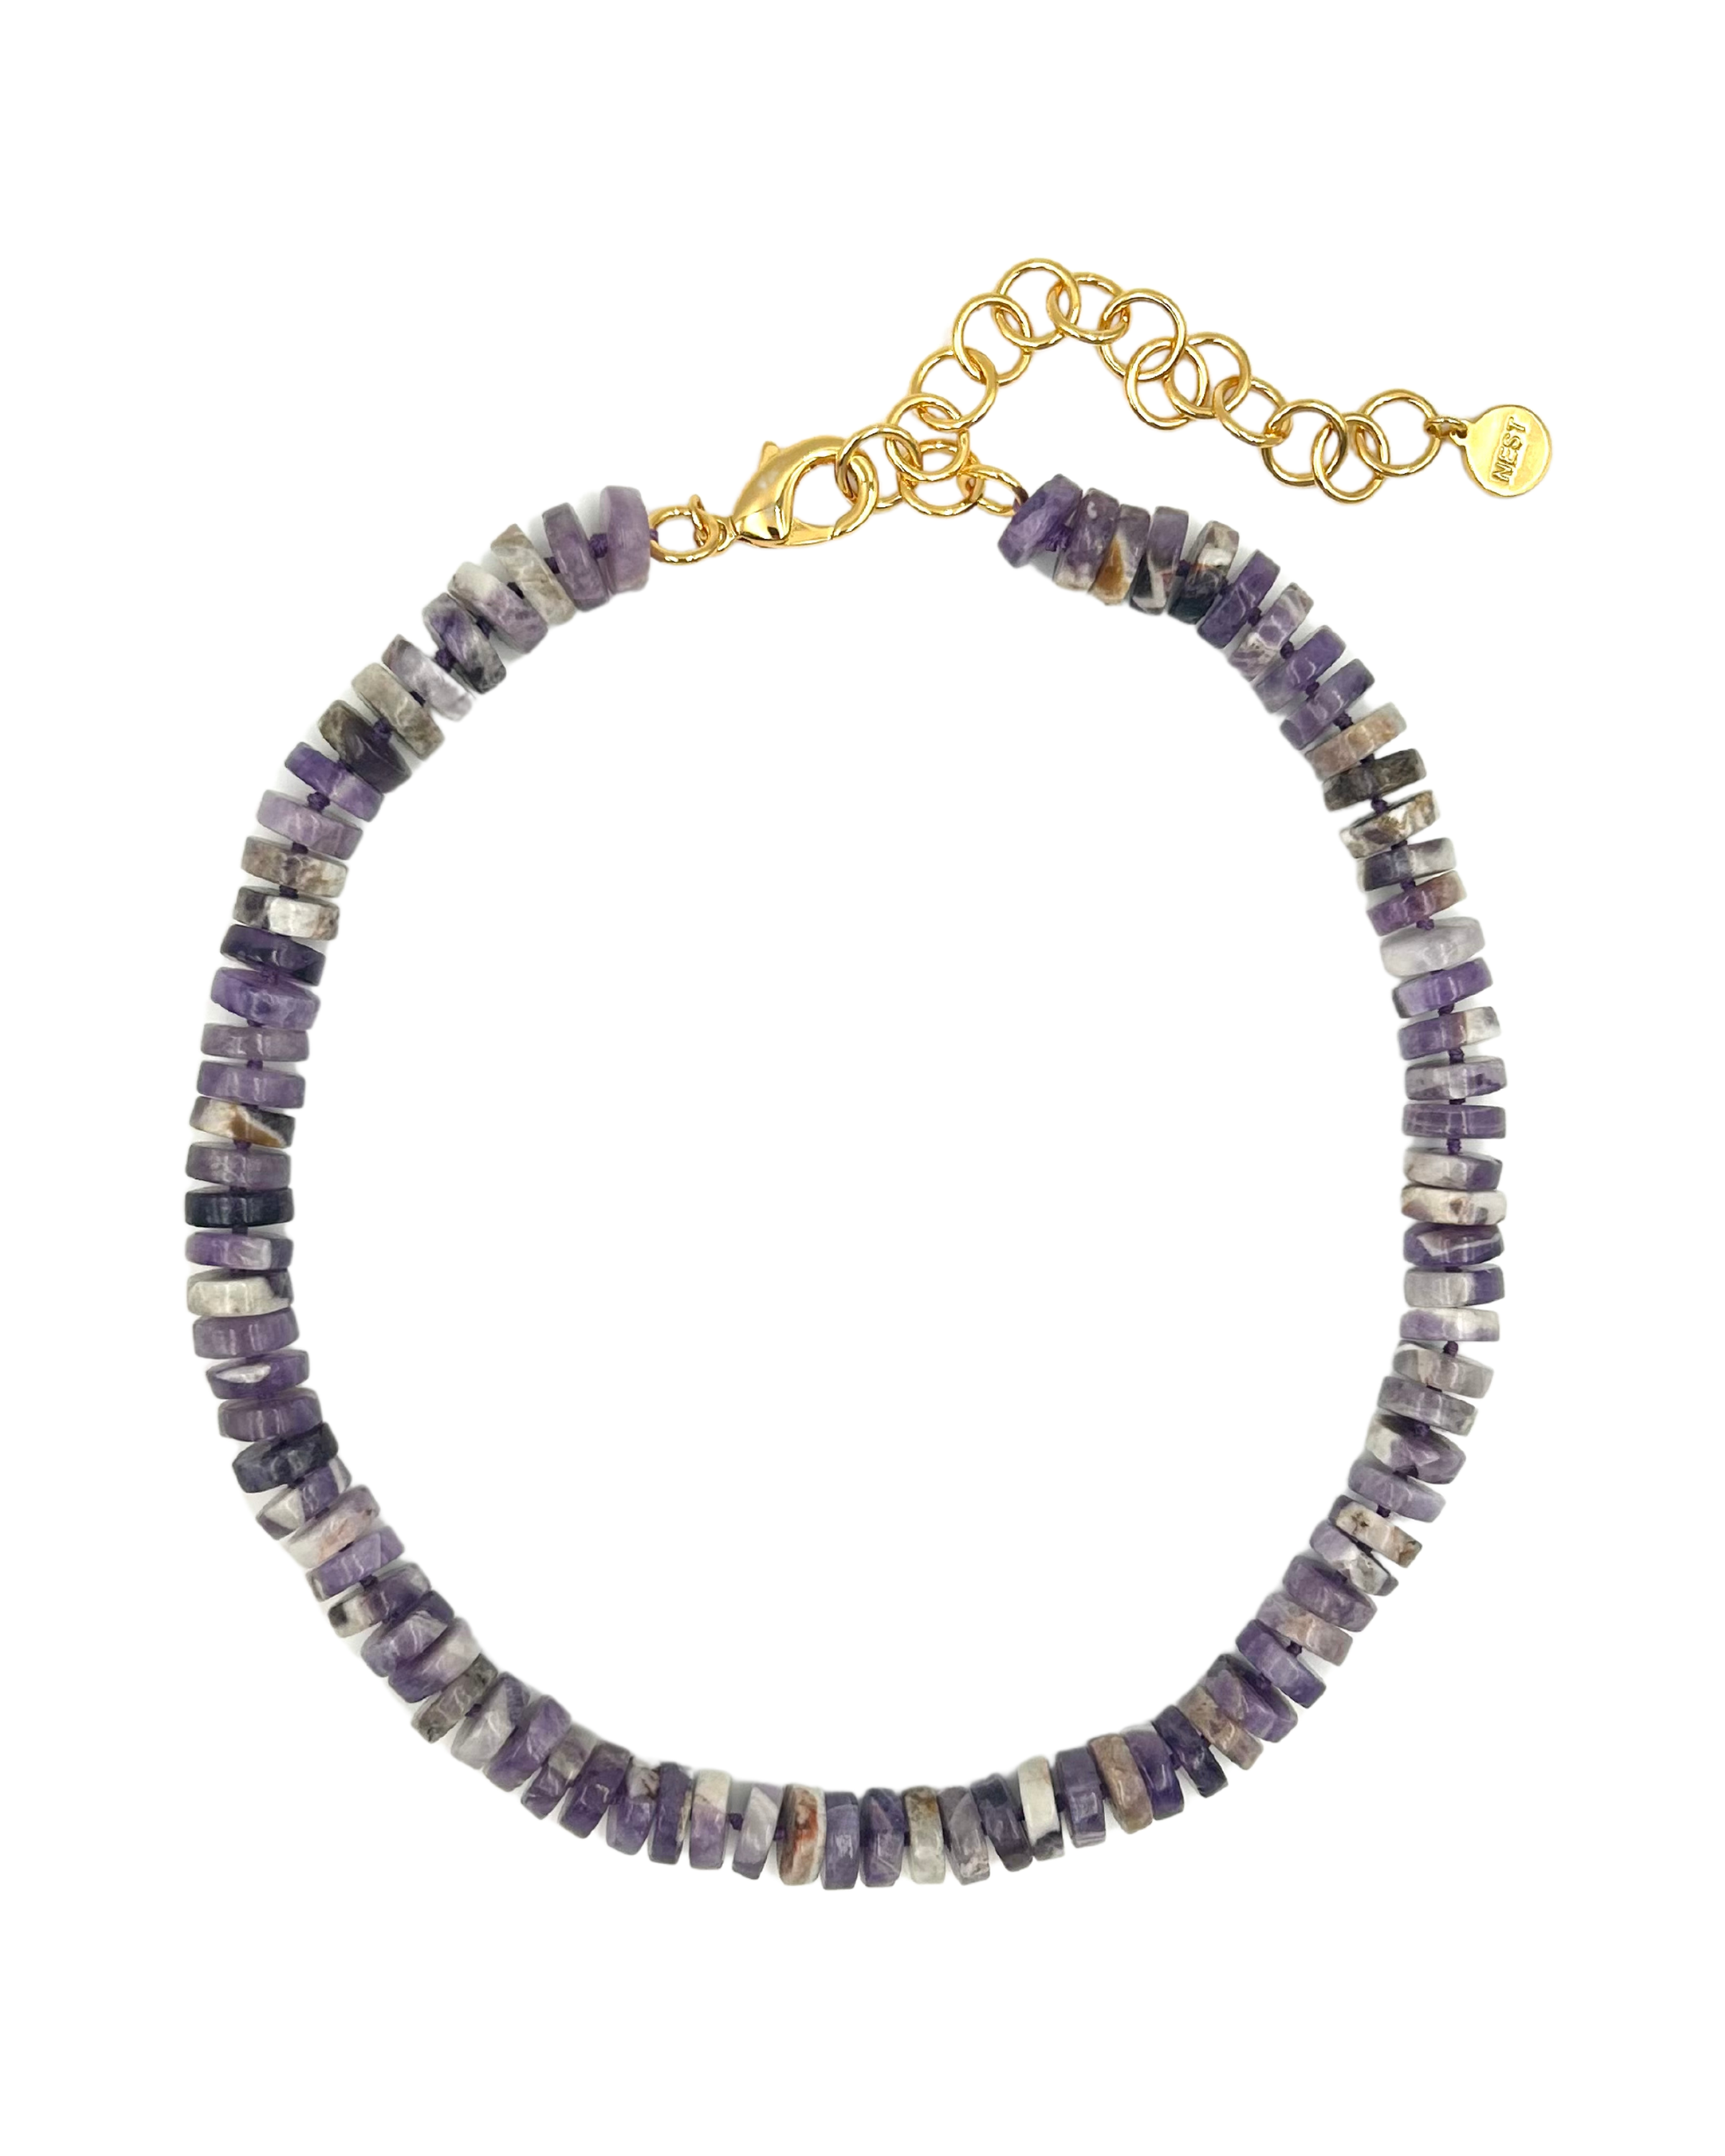 Dogtooth Amethyst Rondelle Necklace